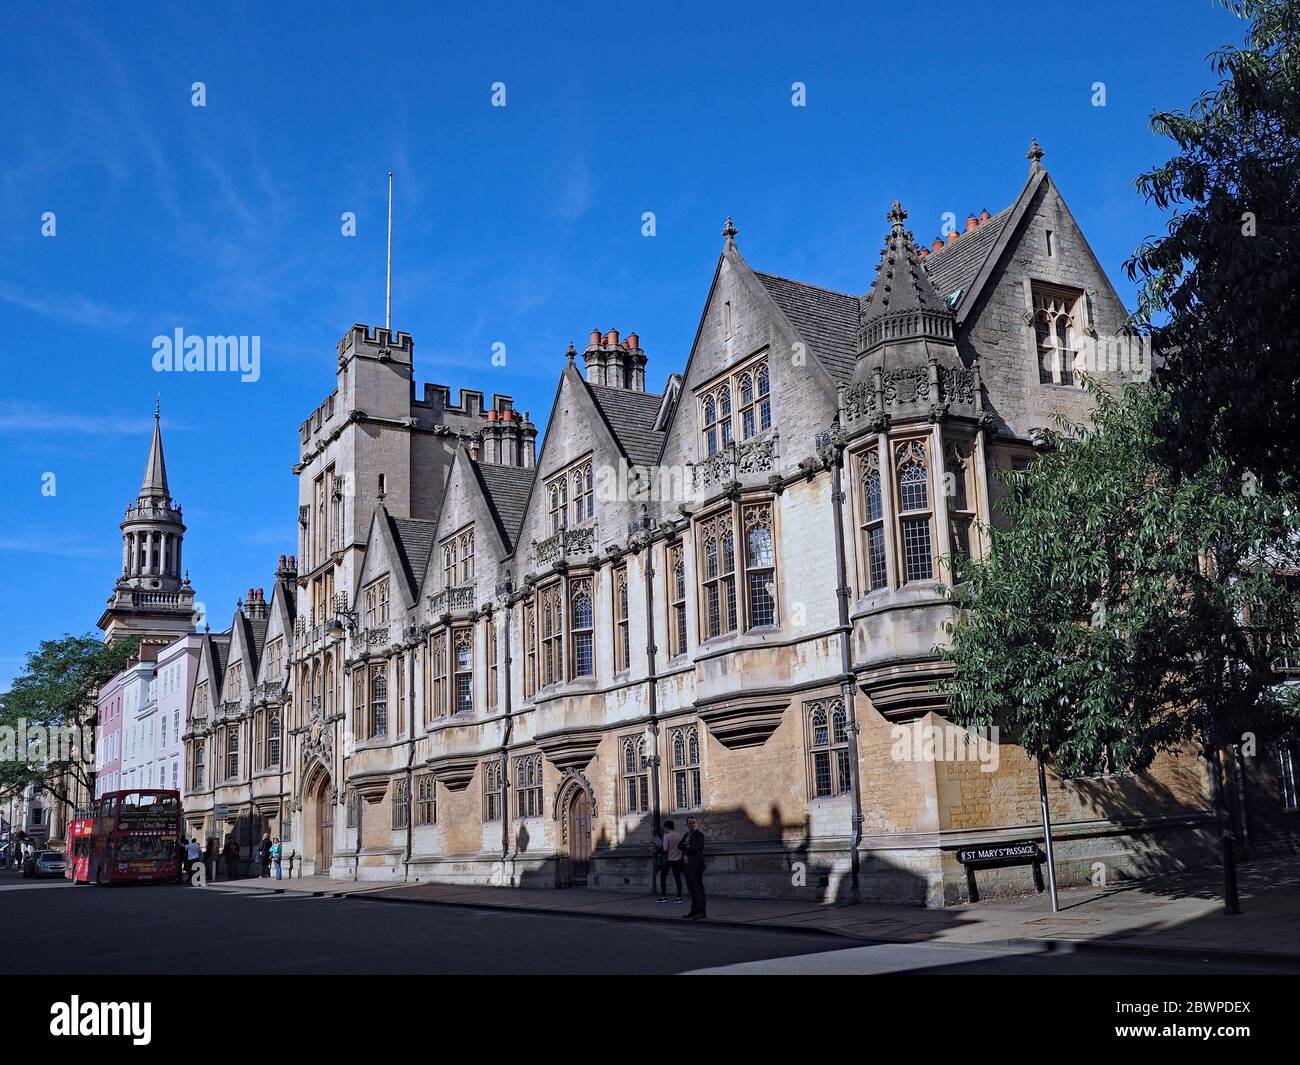 OXFORD, ENGLAND - SEPTEMBER 28, 2016:  Gargoyles and leaded glass bay windows look out onto the street from one of the ancient Oxford colleges on High Stock Photo